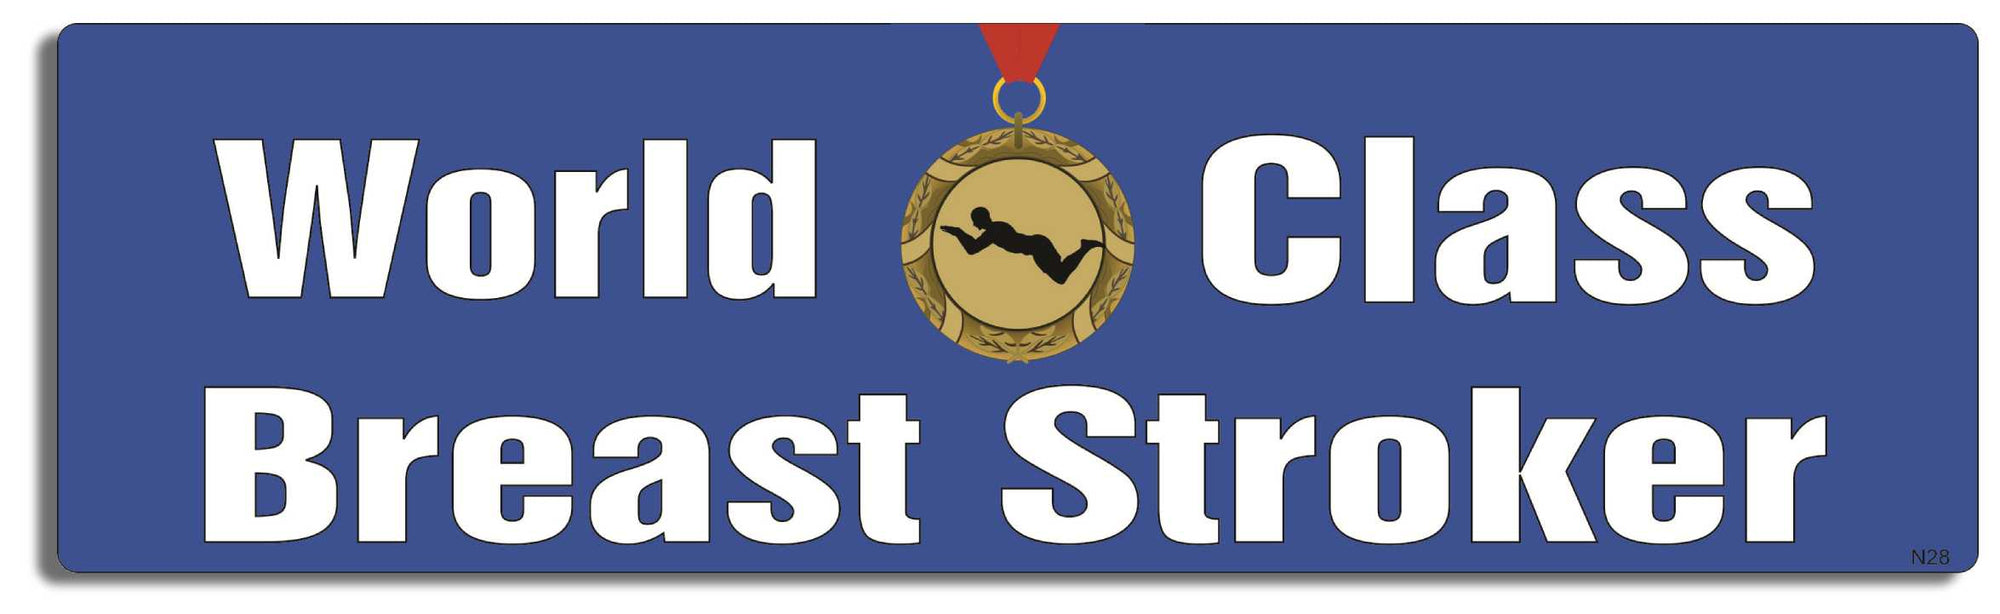 World Class Breast Stroker - 3" x 10" -  Decal Car Car Magnet-dirty Bumper Sticker Car Magnet World Class Breast Stroker-  Decal for carsadult, funny, funny quote, funny saying, naughty